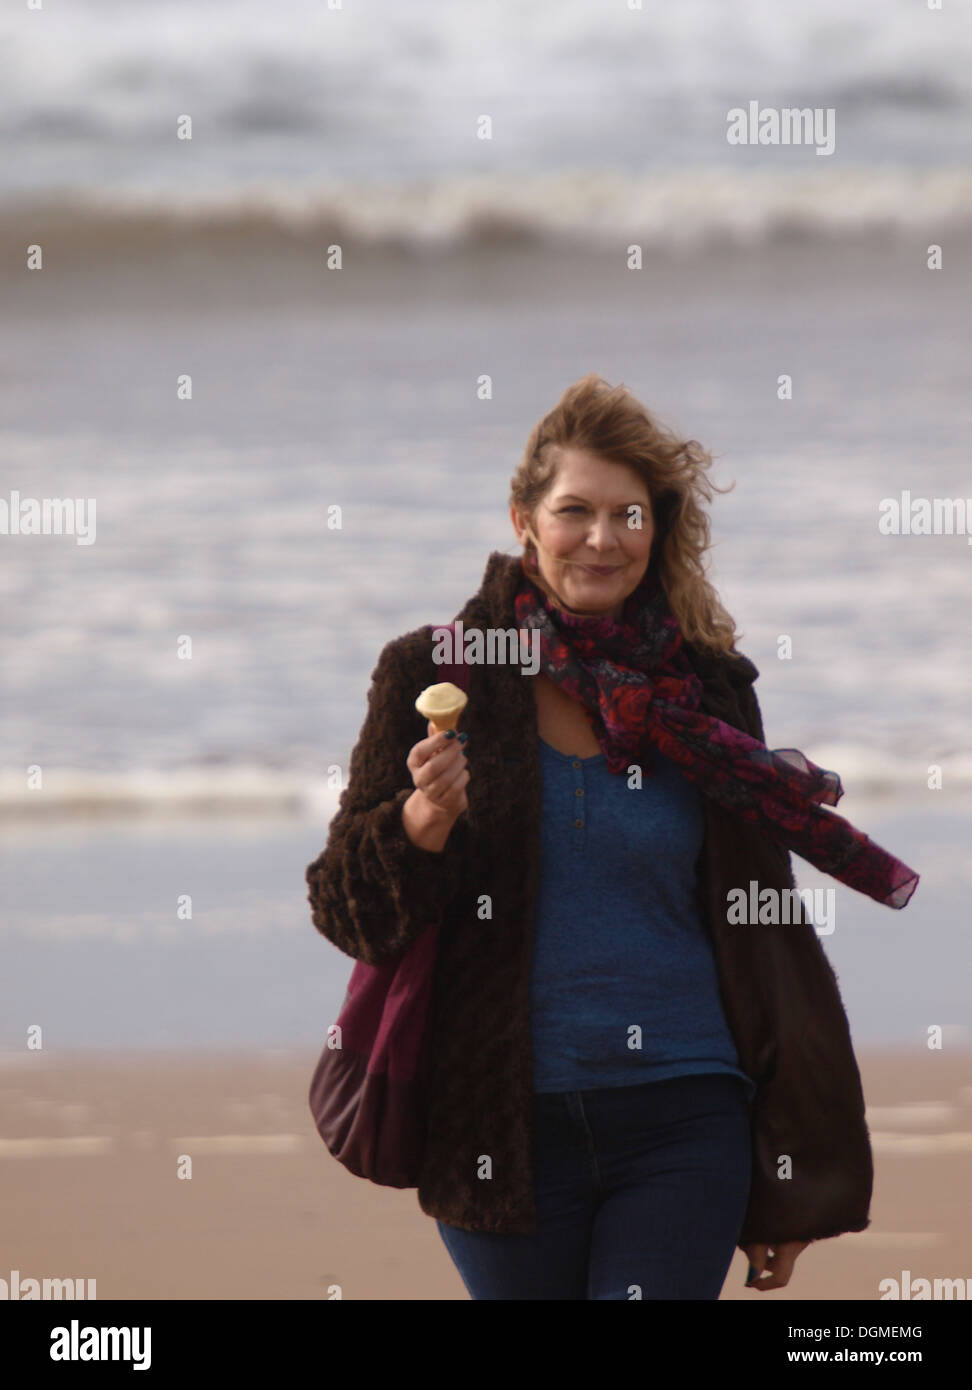 Middle aged woman walking on the beach with an ice-cream in winter, Bude, Cornwall, UK Stock Photo